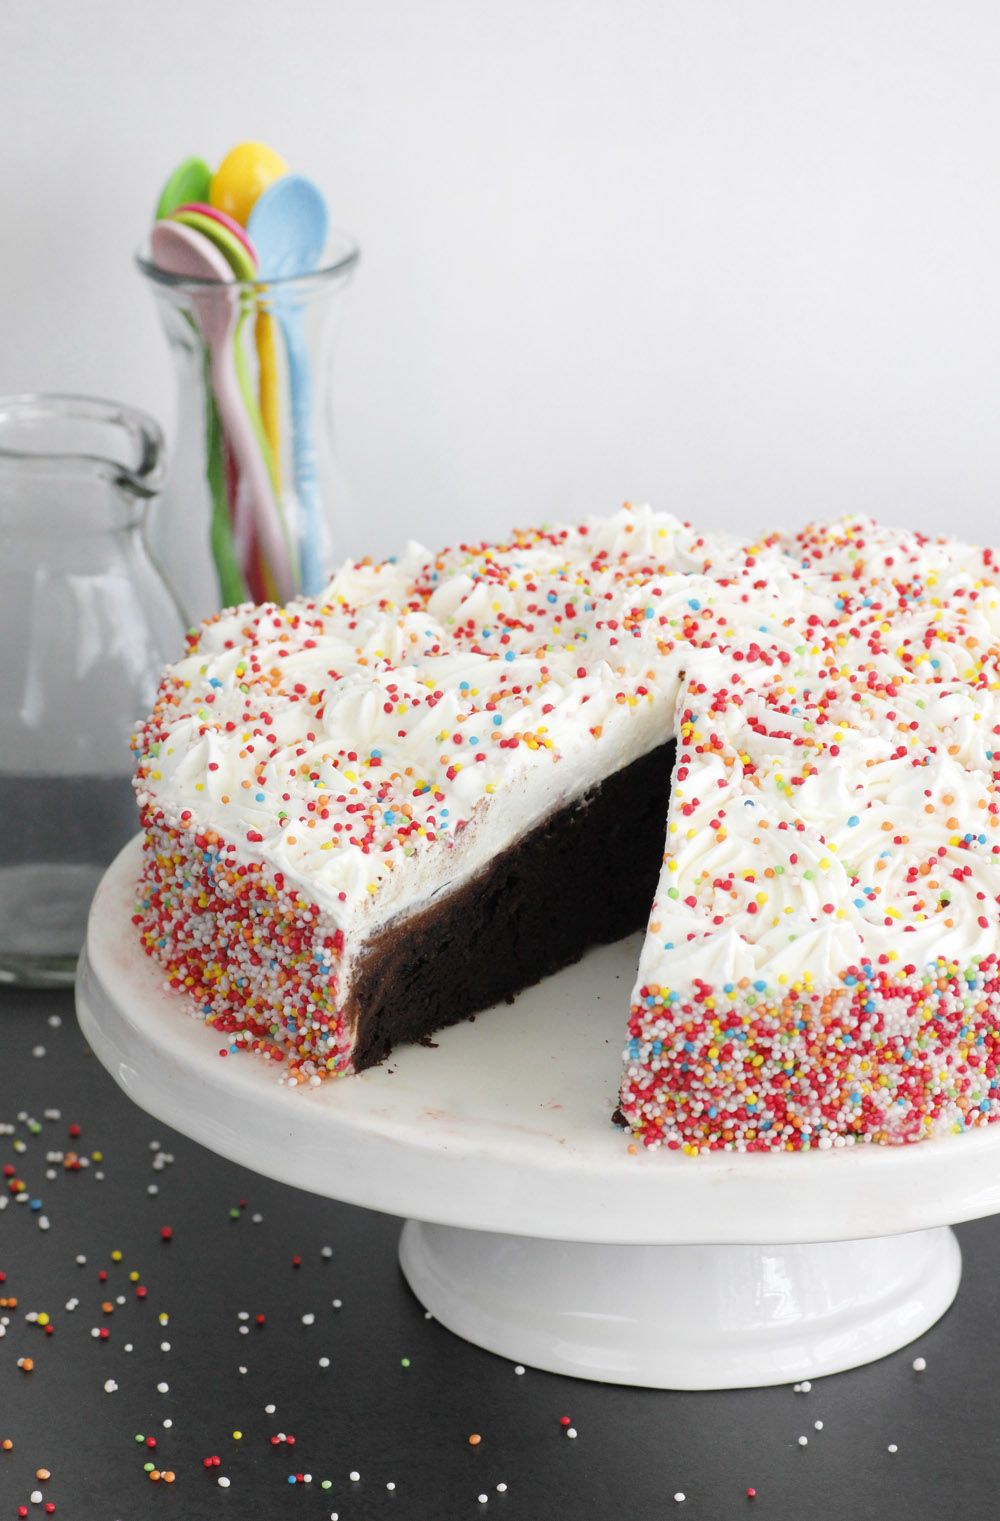 Chocolate Cake with Whipped Cream and Sprinkles